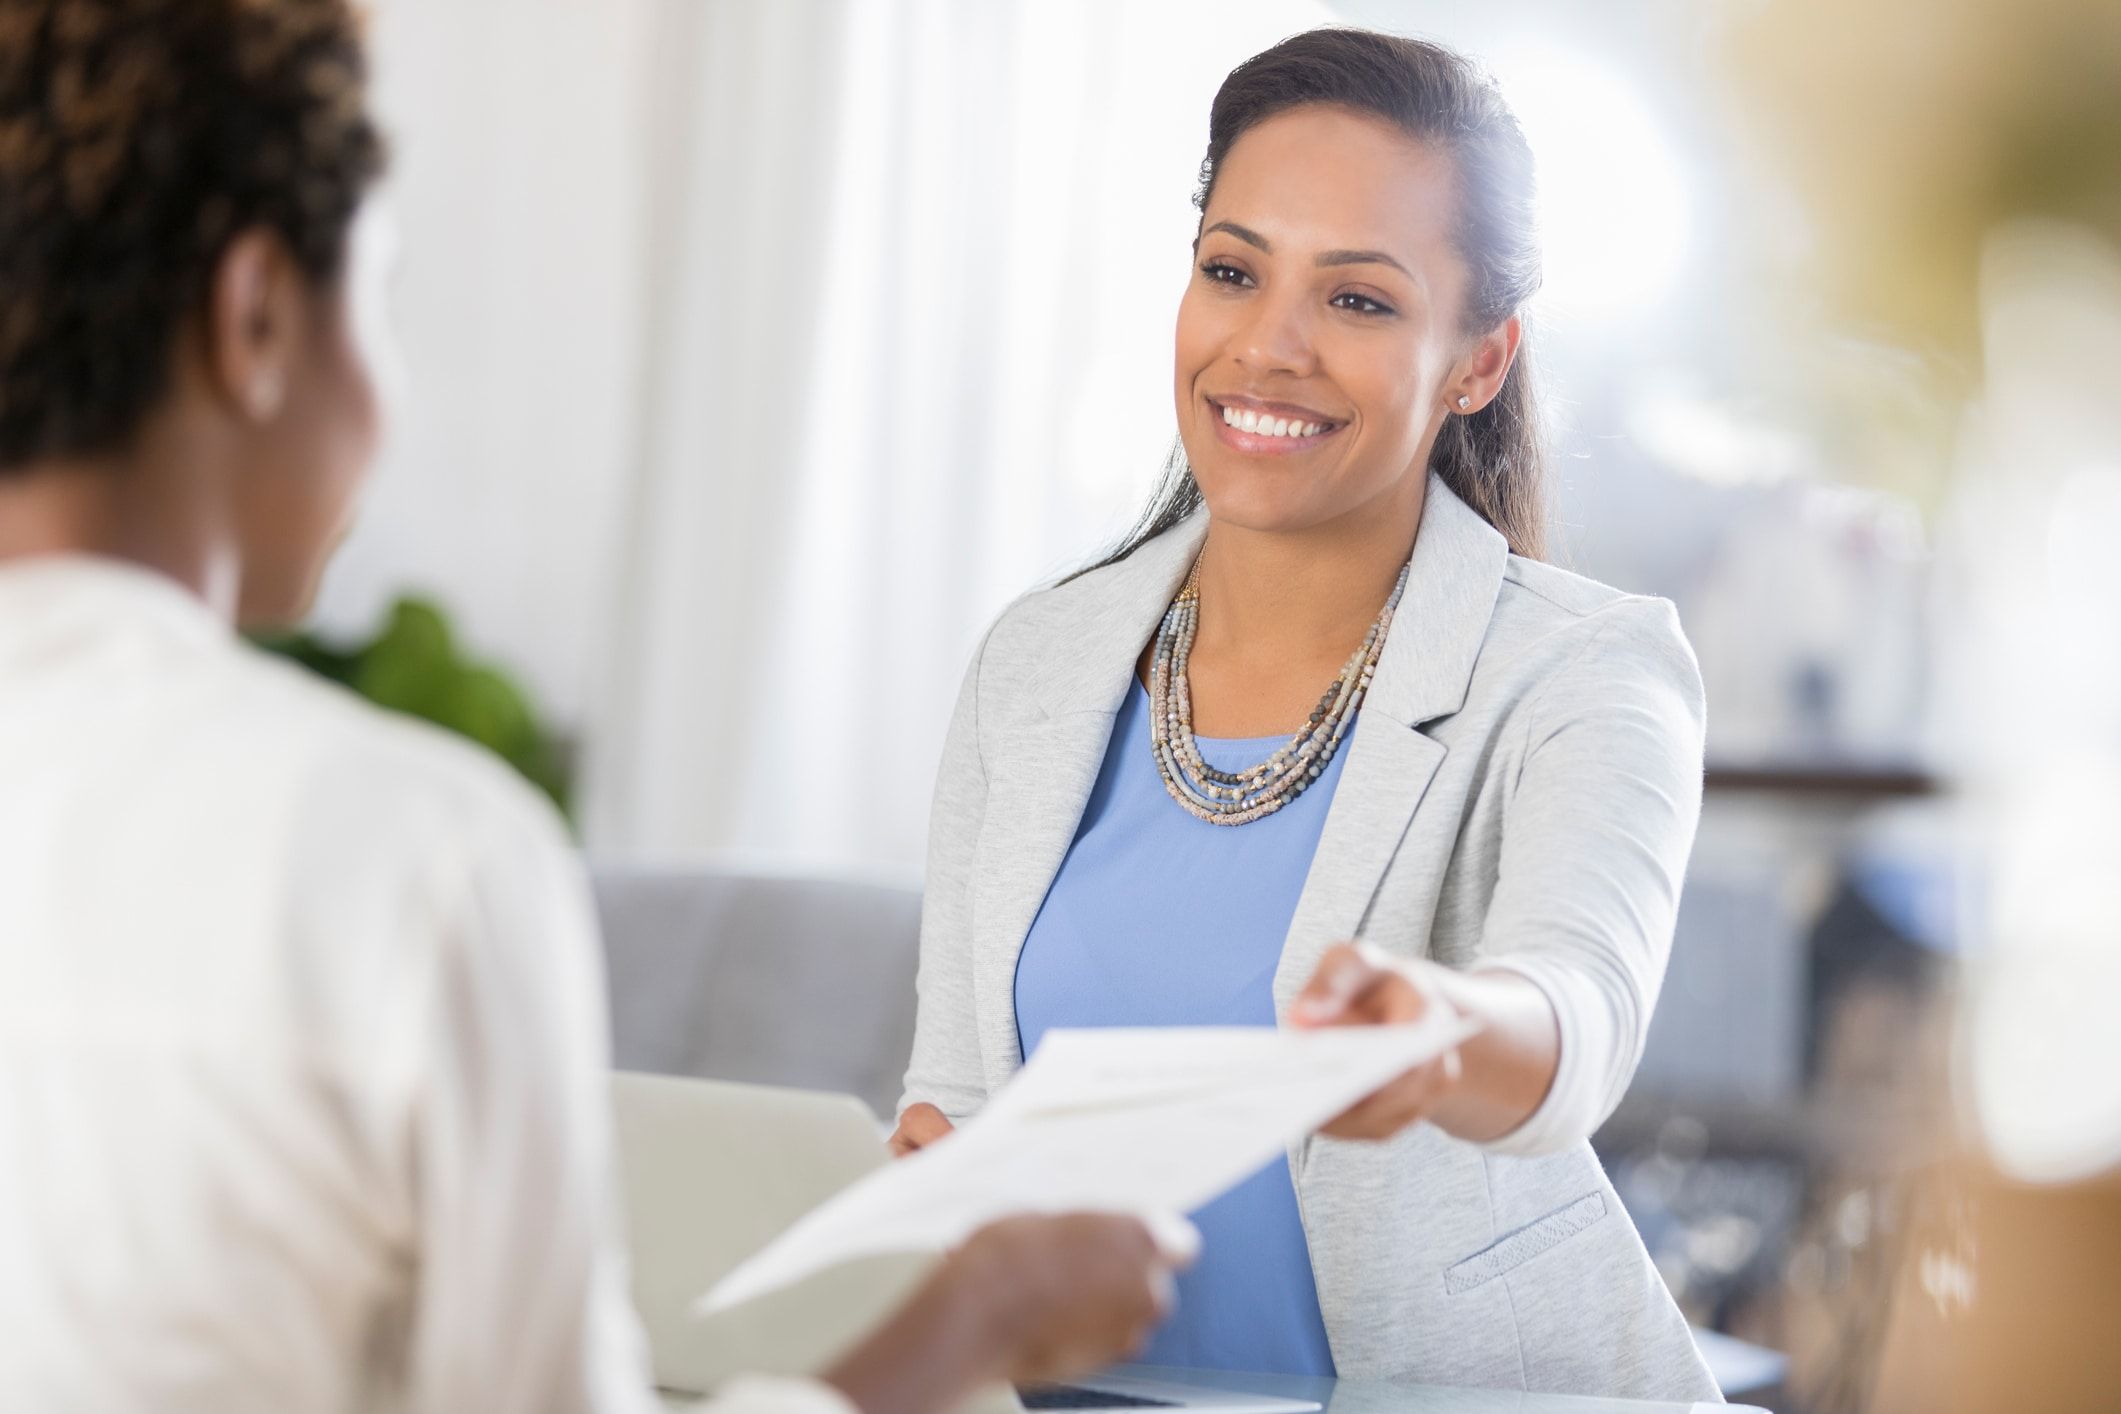 6 mistakes that could prevent you from getting a senior care job interview and offer